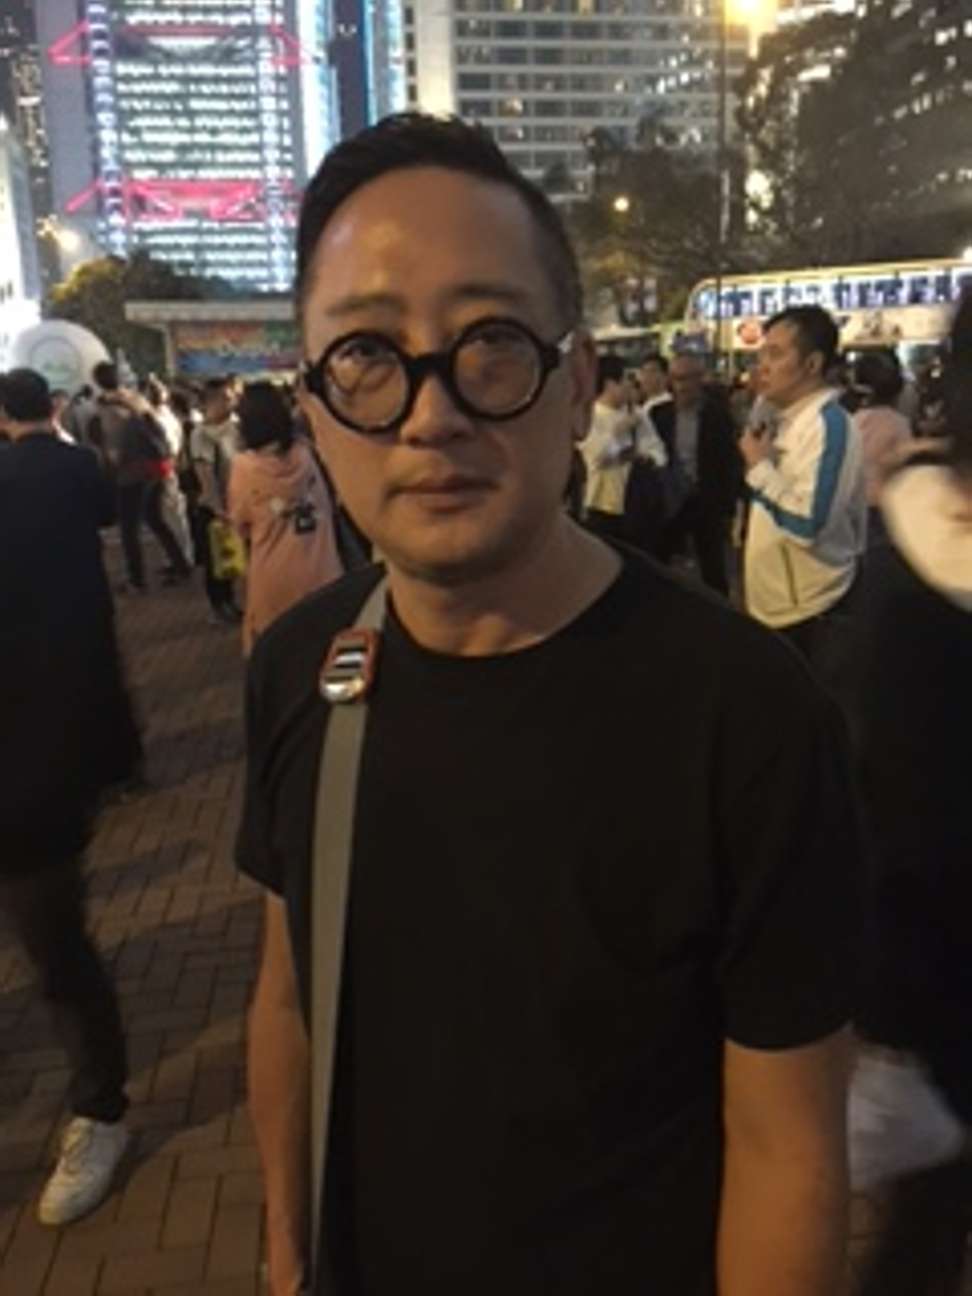 Tsang supporter William Wong attended the rally.